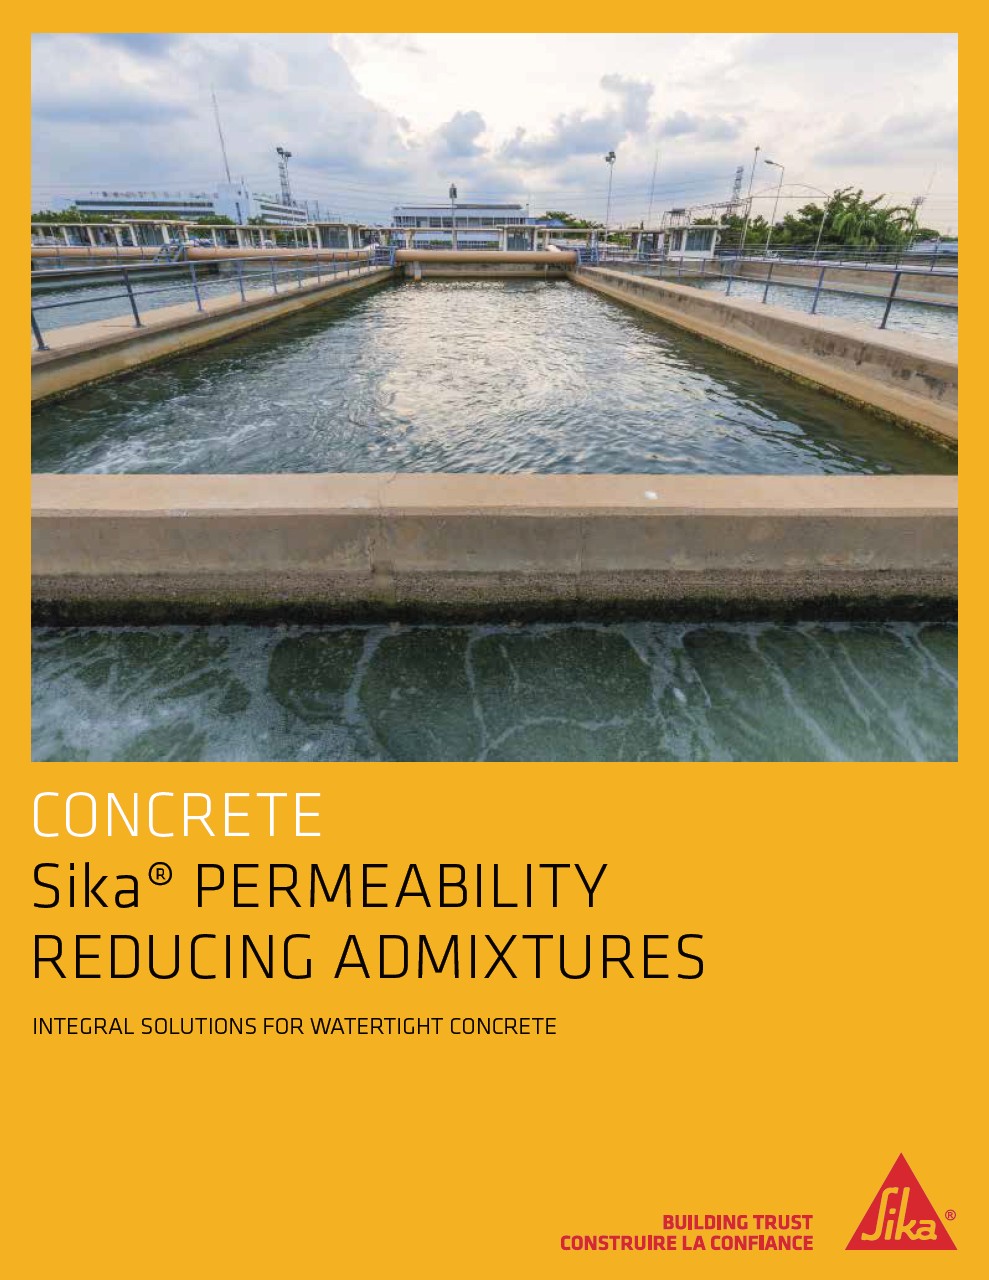 Integral Solutions for Watertight Concrete